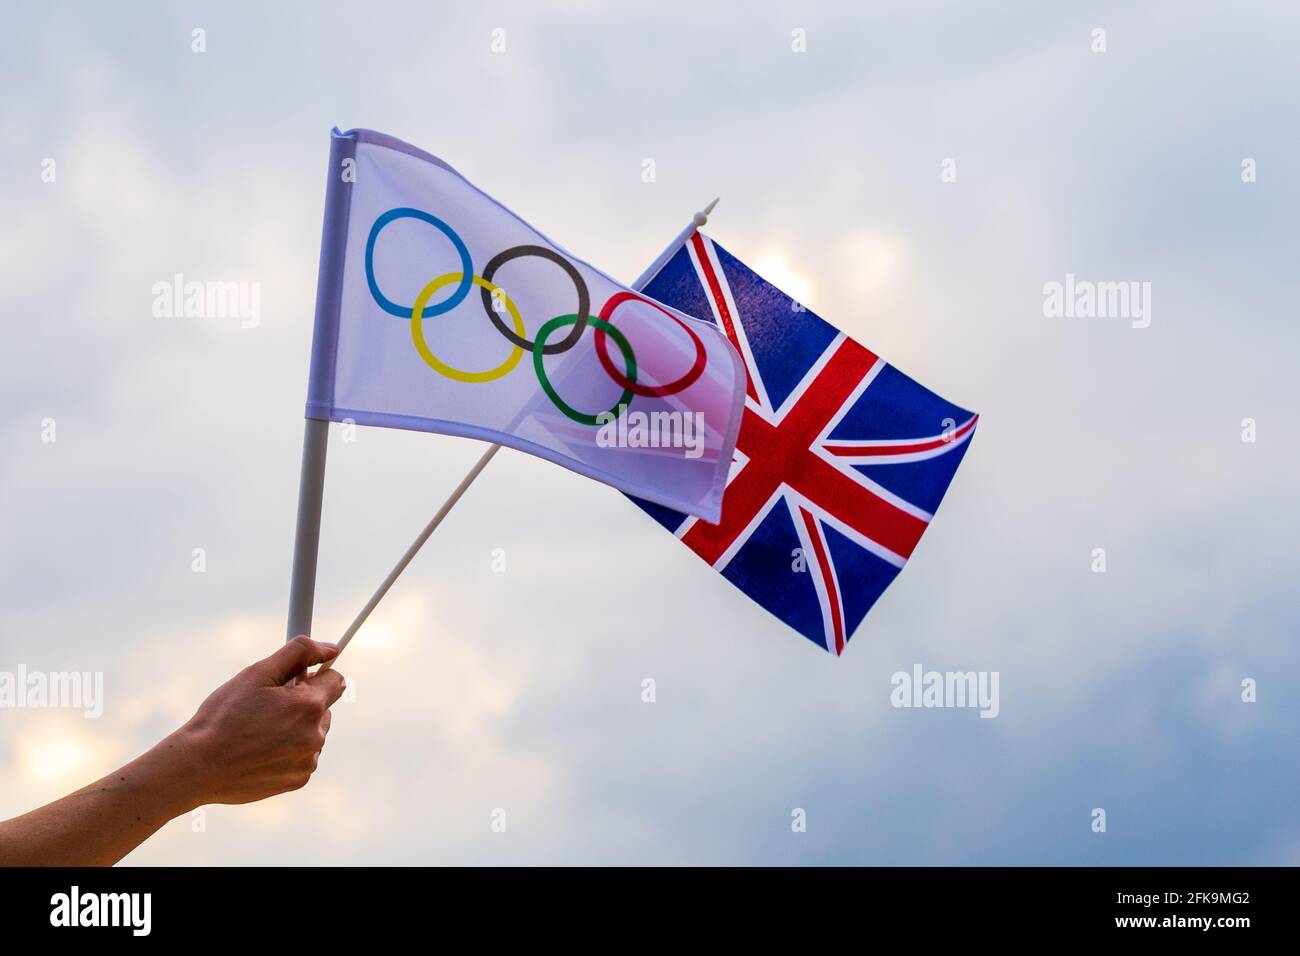 Fan waving the national flag of  United Kingdom and the Olympic flag with symbol olympics rings. Stock Photo